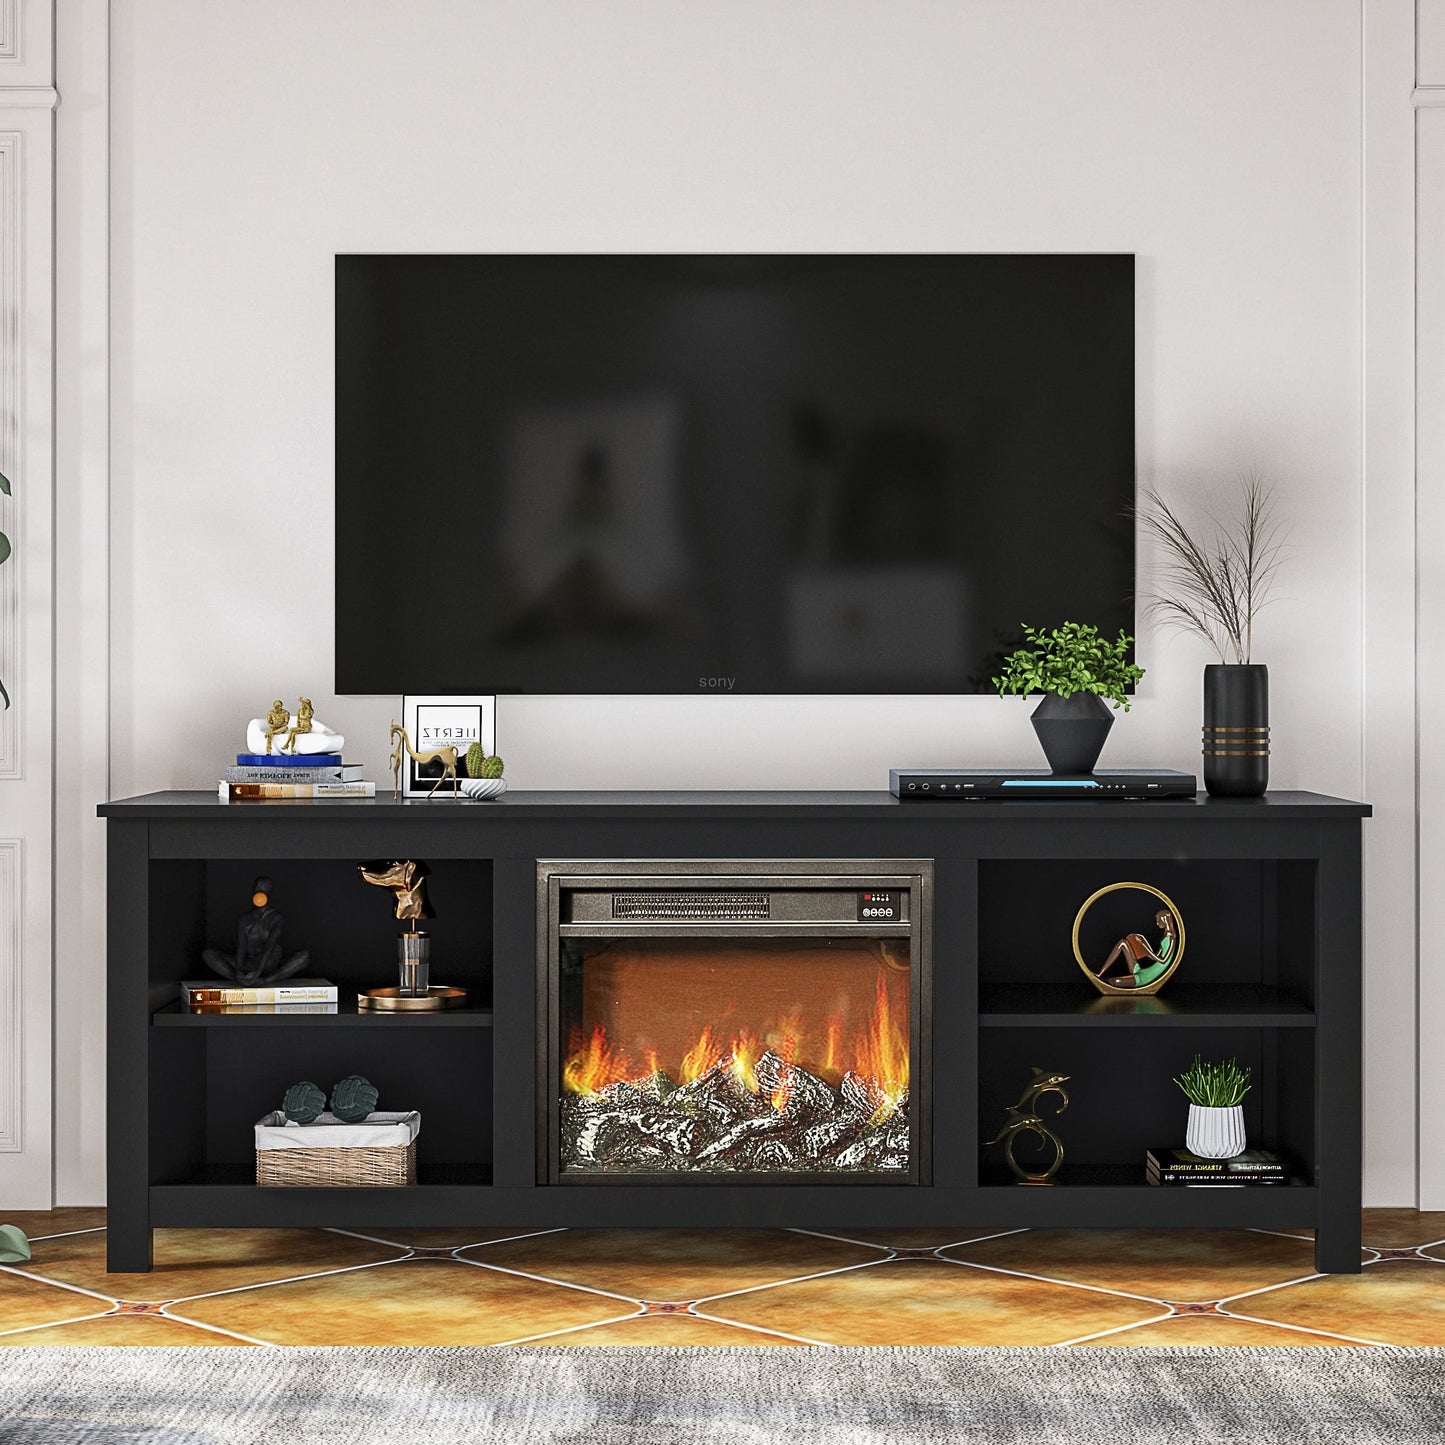 SYNGAR TV Stand with Fireplace, Modern TV Cabinet for TVs up to 65 inch, Electric Fireplace TV Stand with Storage, Entertainment Center Console Table, for Living Room Bedroom, Espresso, D3184